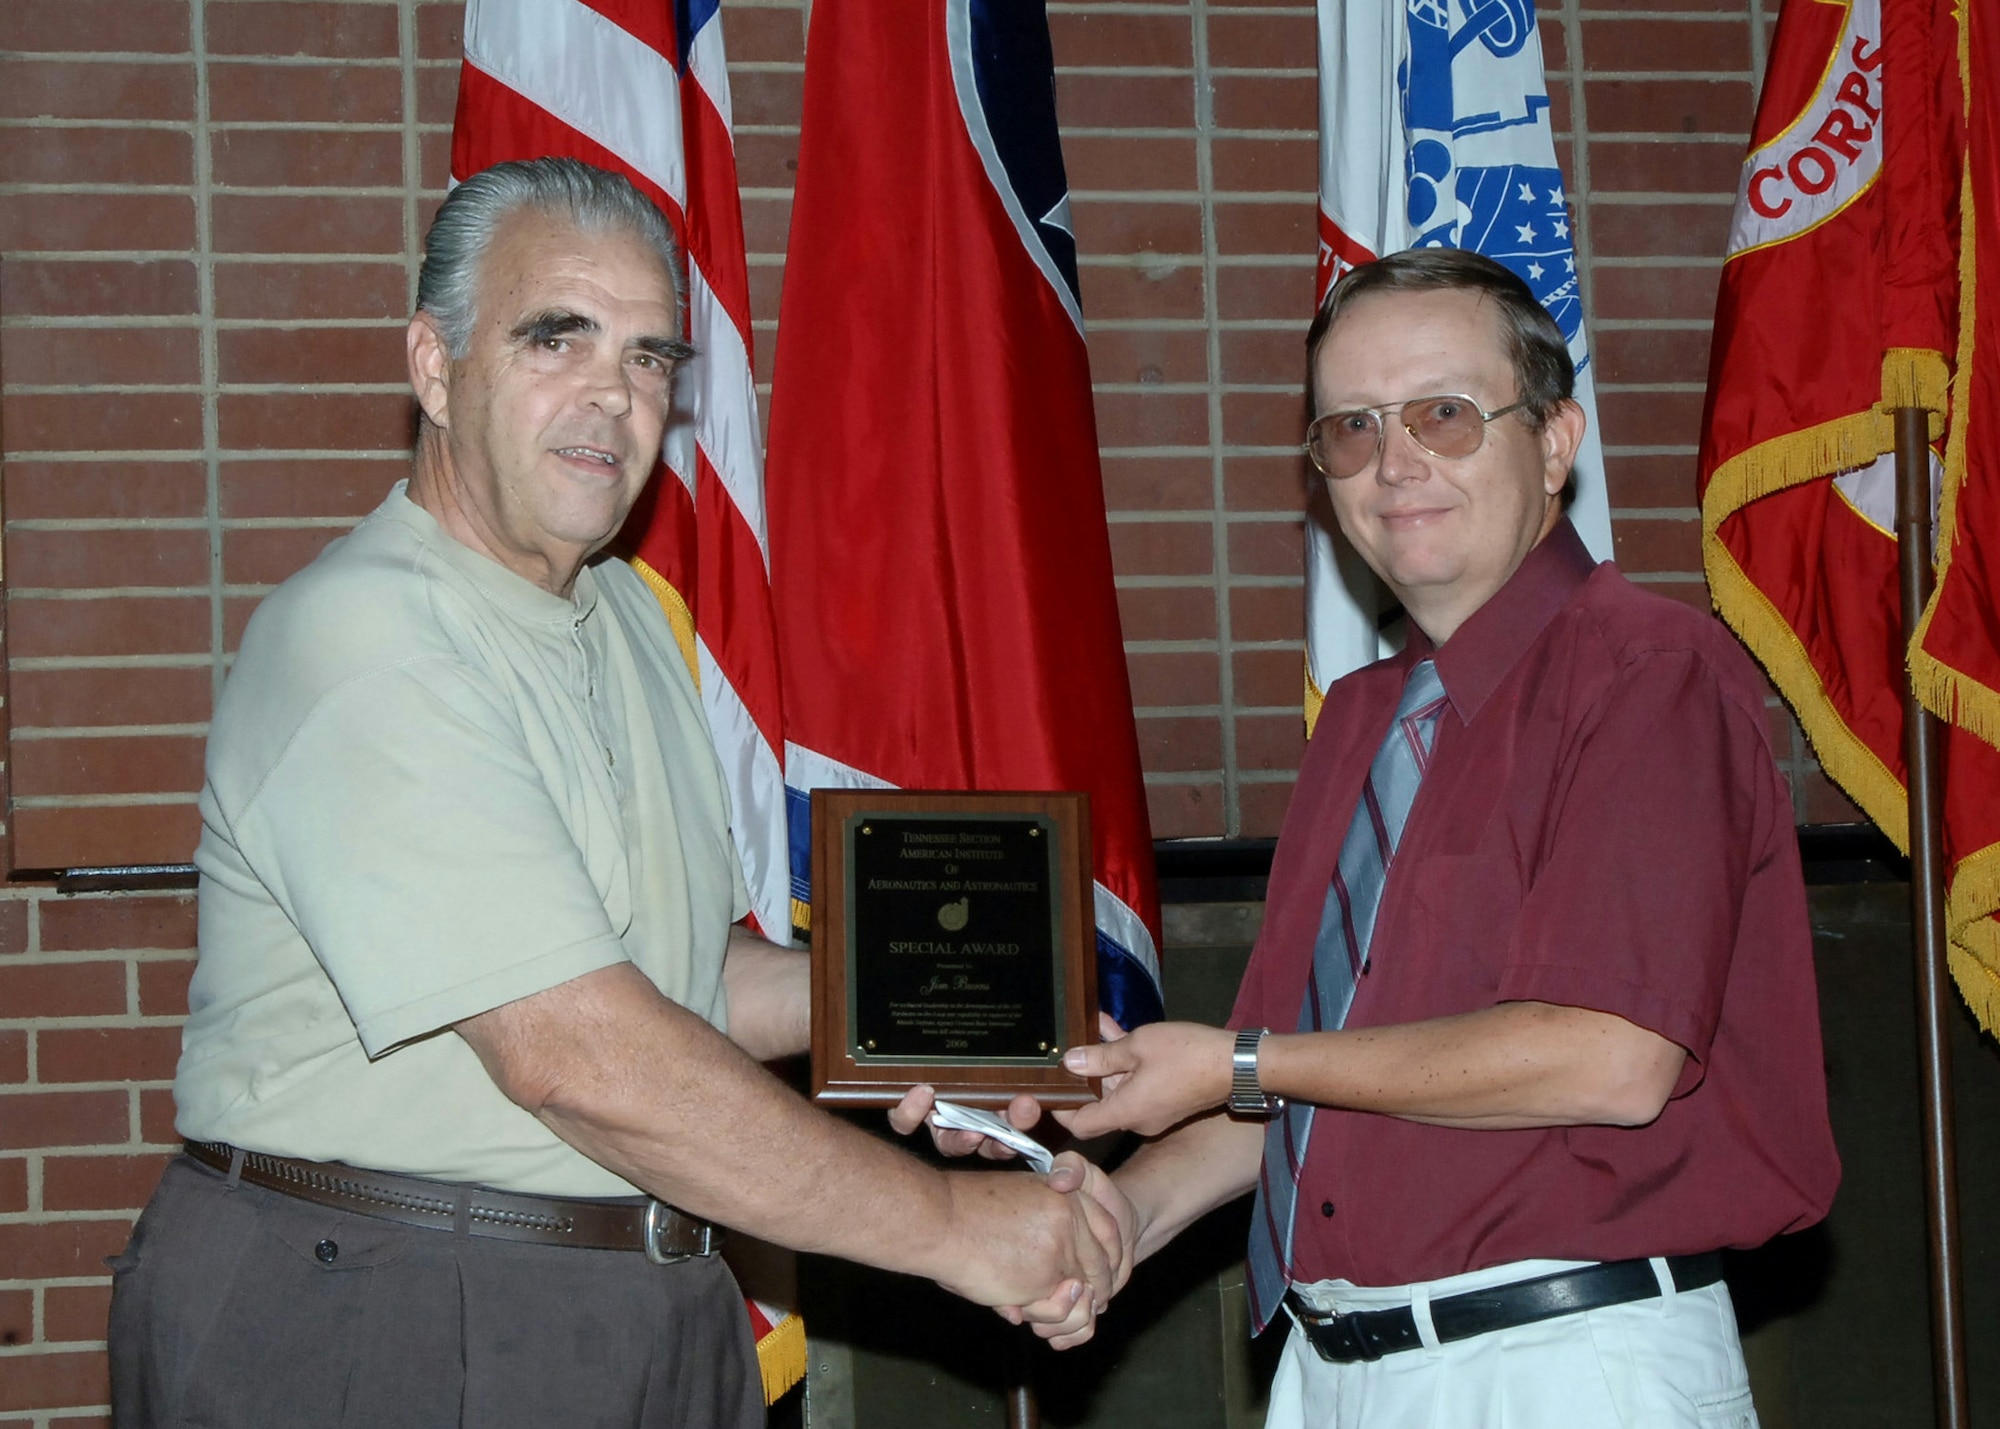 Dale Bradley, then technical director for the Arnold Engineering Development Complex 718th Test Squadron, presents an American Institute of Aeronautics and Astronautics special award to fellow AEDC employee Jim Burns during a June 2006 ceremony at Arnold Lakeside Complex at Arnold Air Force Base, Tenn. (U.S. Air Force photo)